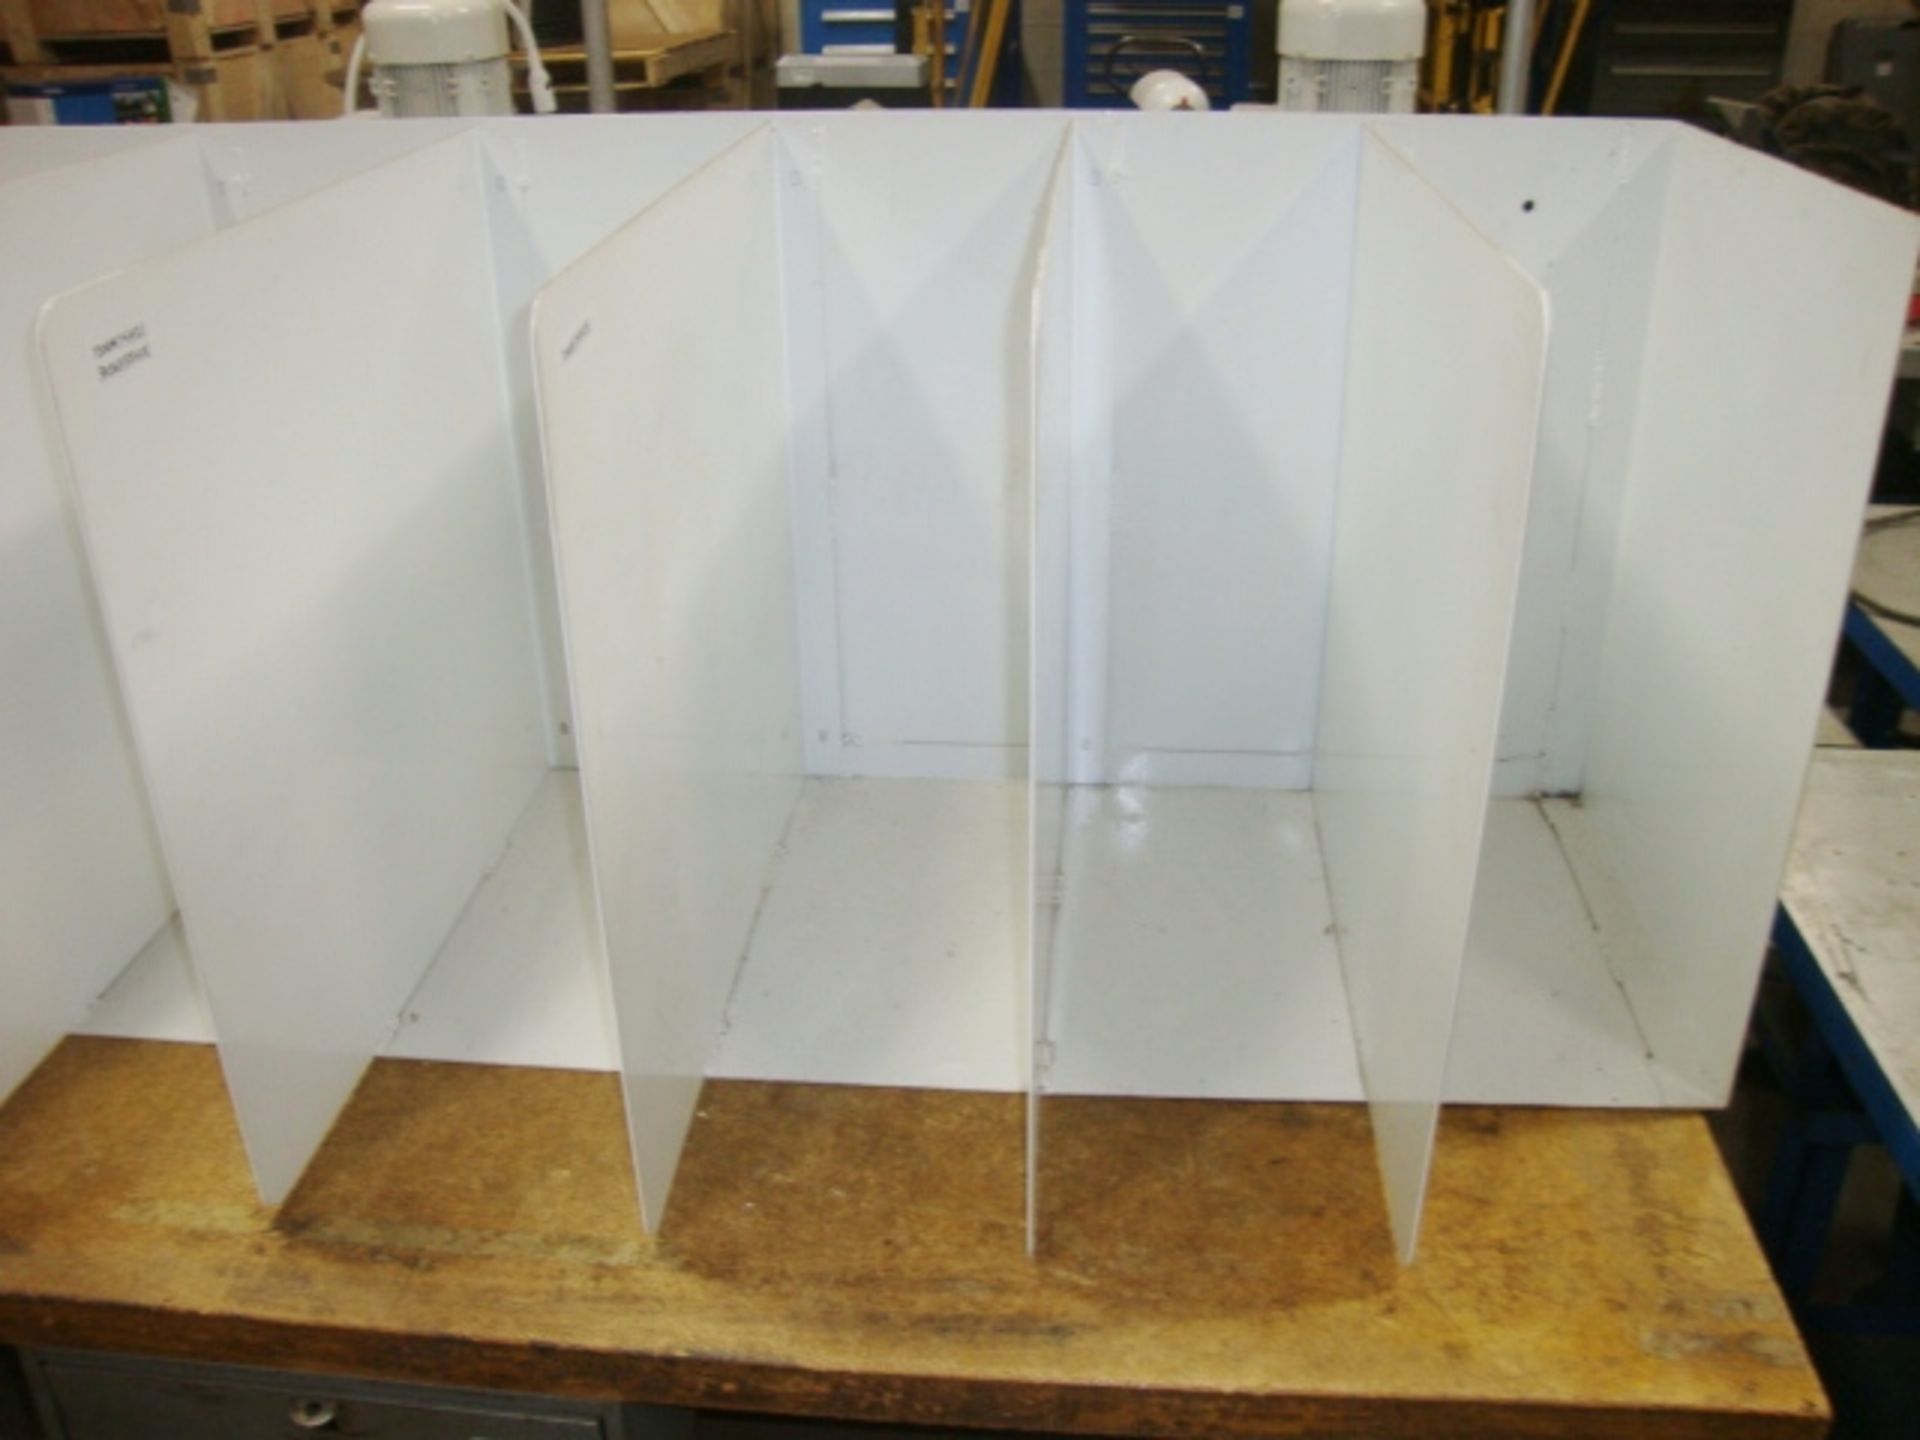 Metal Divider used as reel holder, approx. 68" x 25" x 24" tall - Image 2 of 4